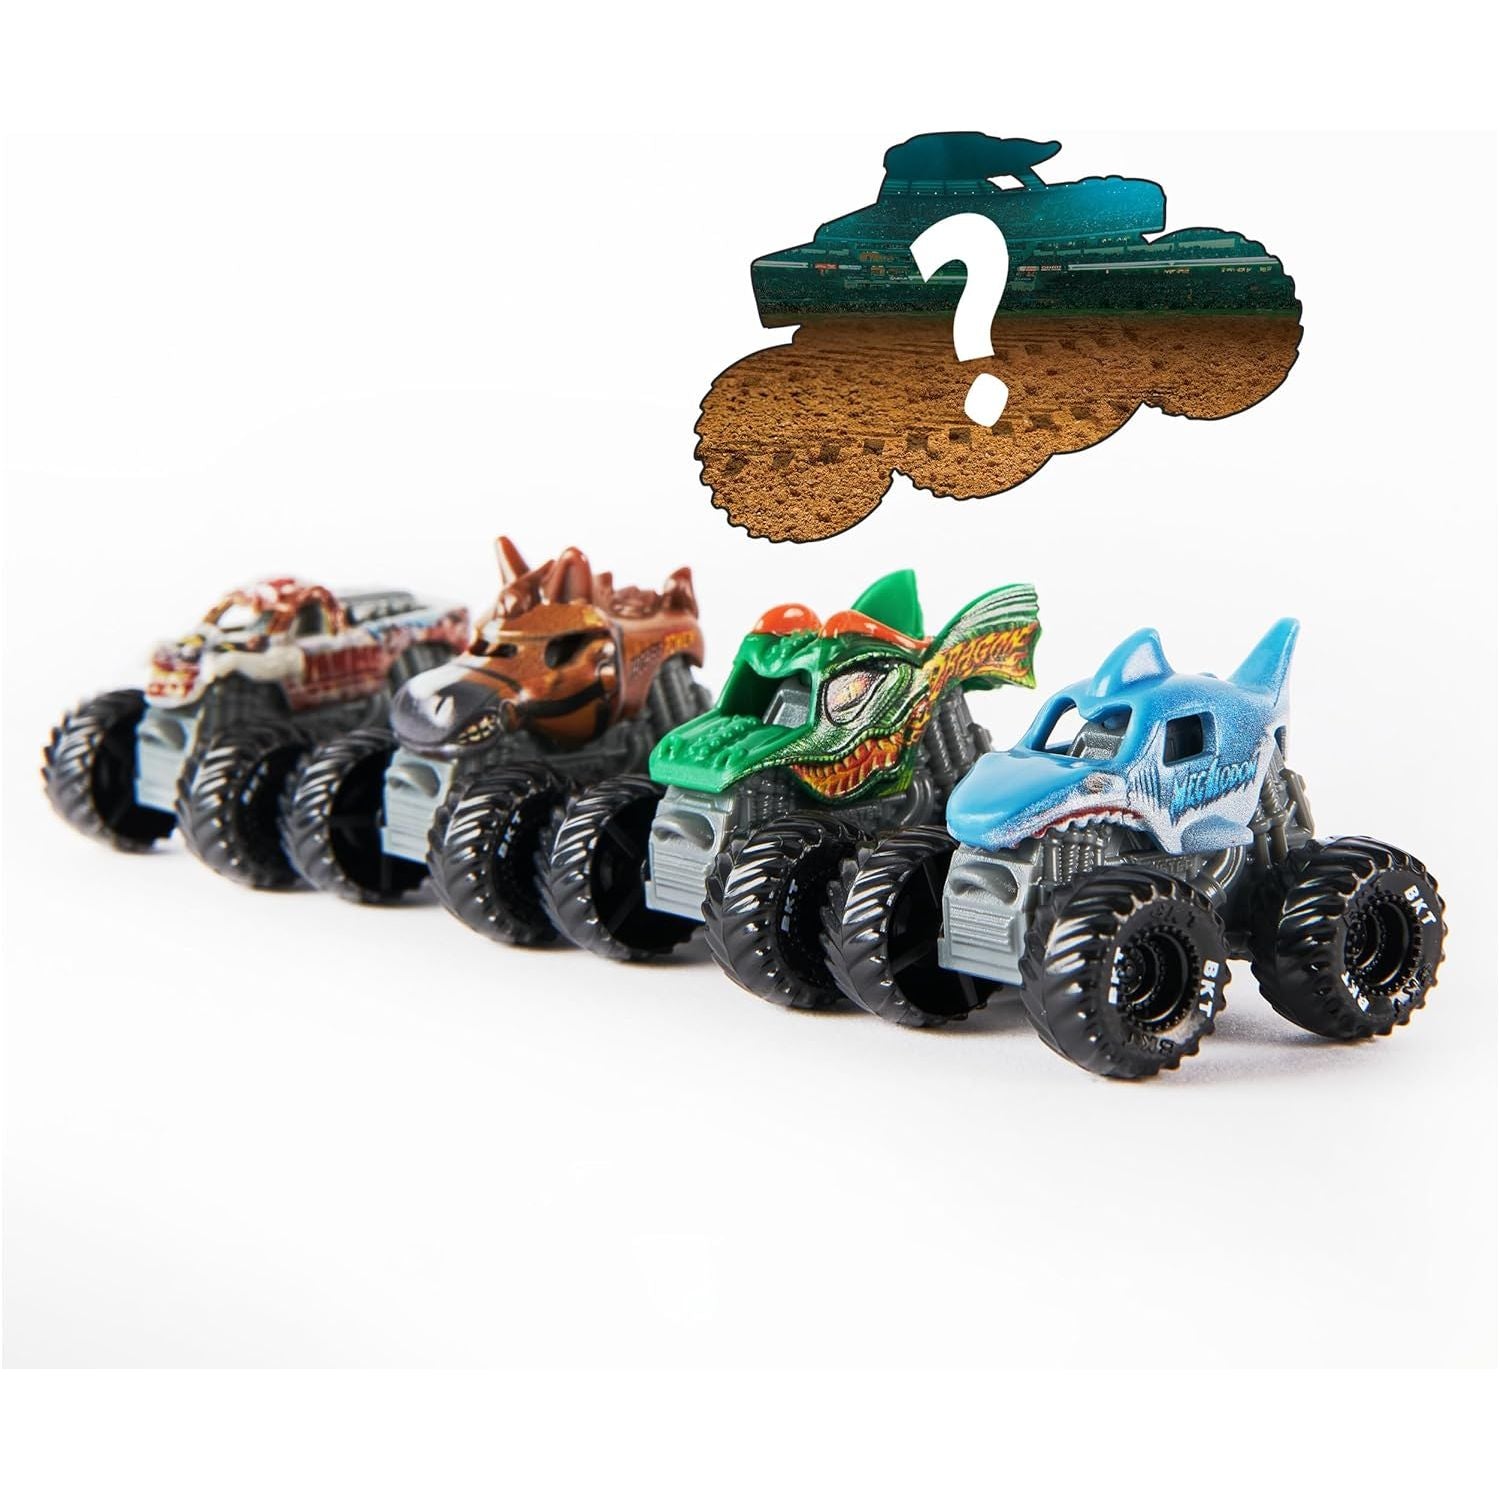 SPIN MASTER MONSTER JAM MINI 5 PACK WITH MYSTERY TRUCK